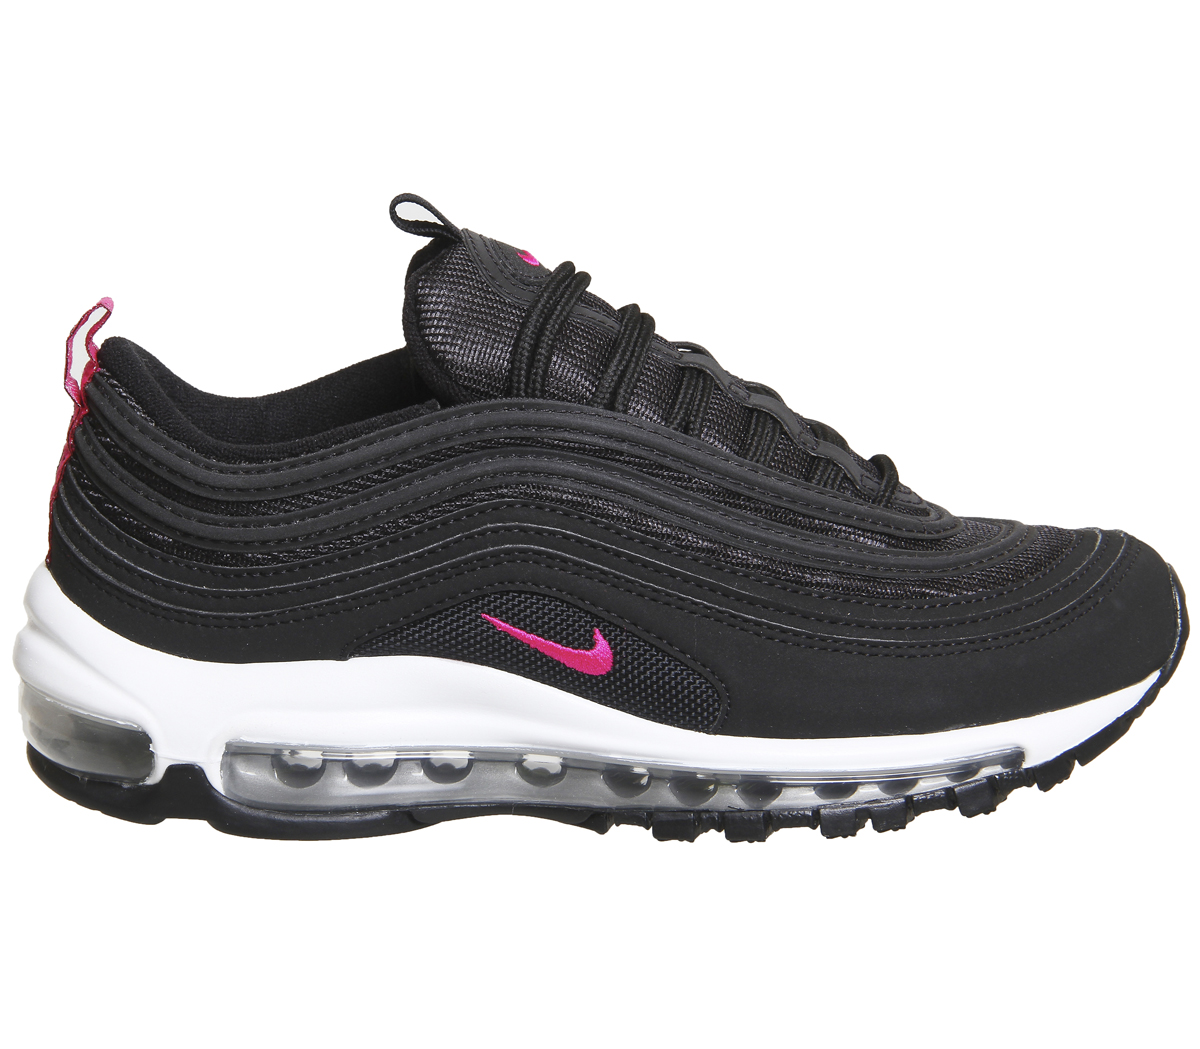 Nike Air Max 97 Black Pink - Hers trainers